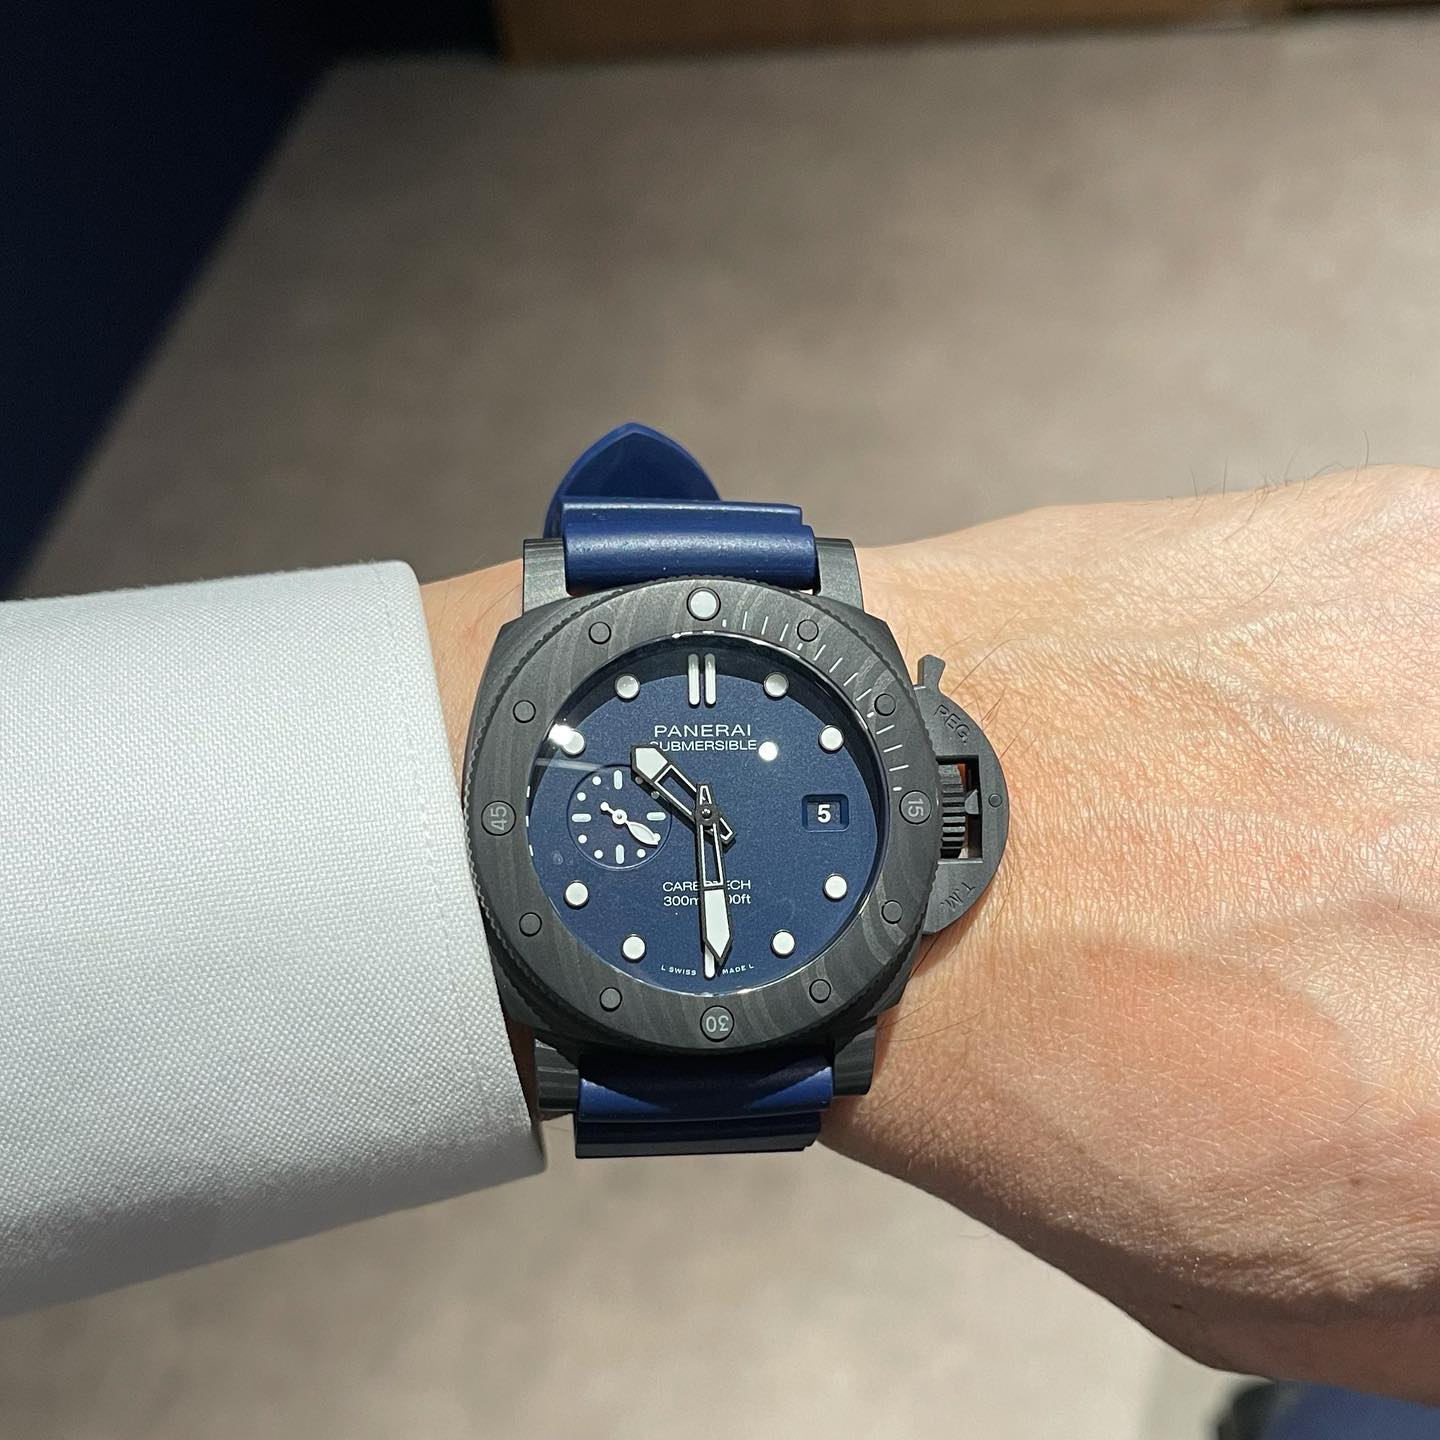 Panerai Submersible QuarantaQuattro (forty four) Carbotech Blu Abisso PAM01232 (2022)